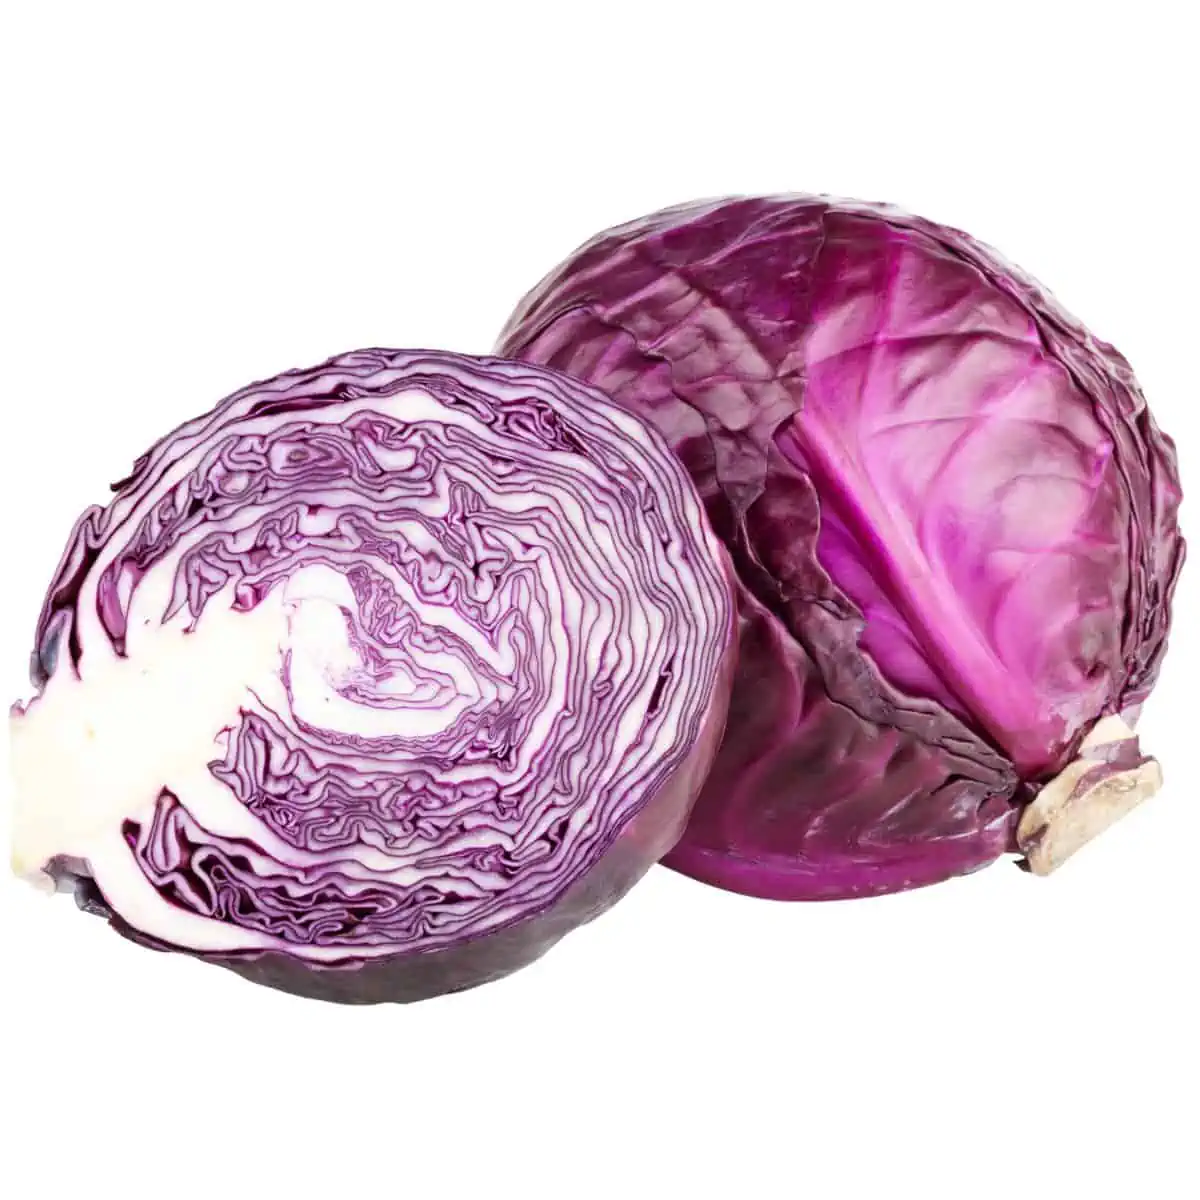 A whole red cabbage with a halved red cabbage sitting in front.